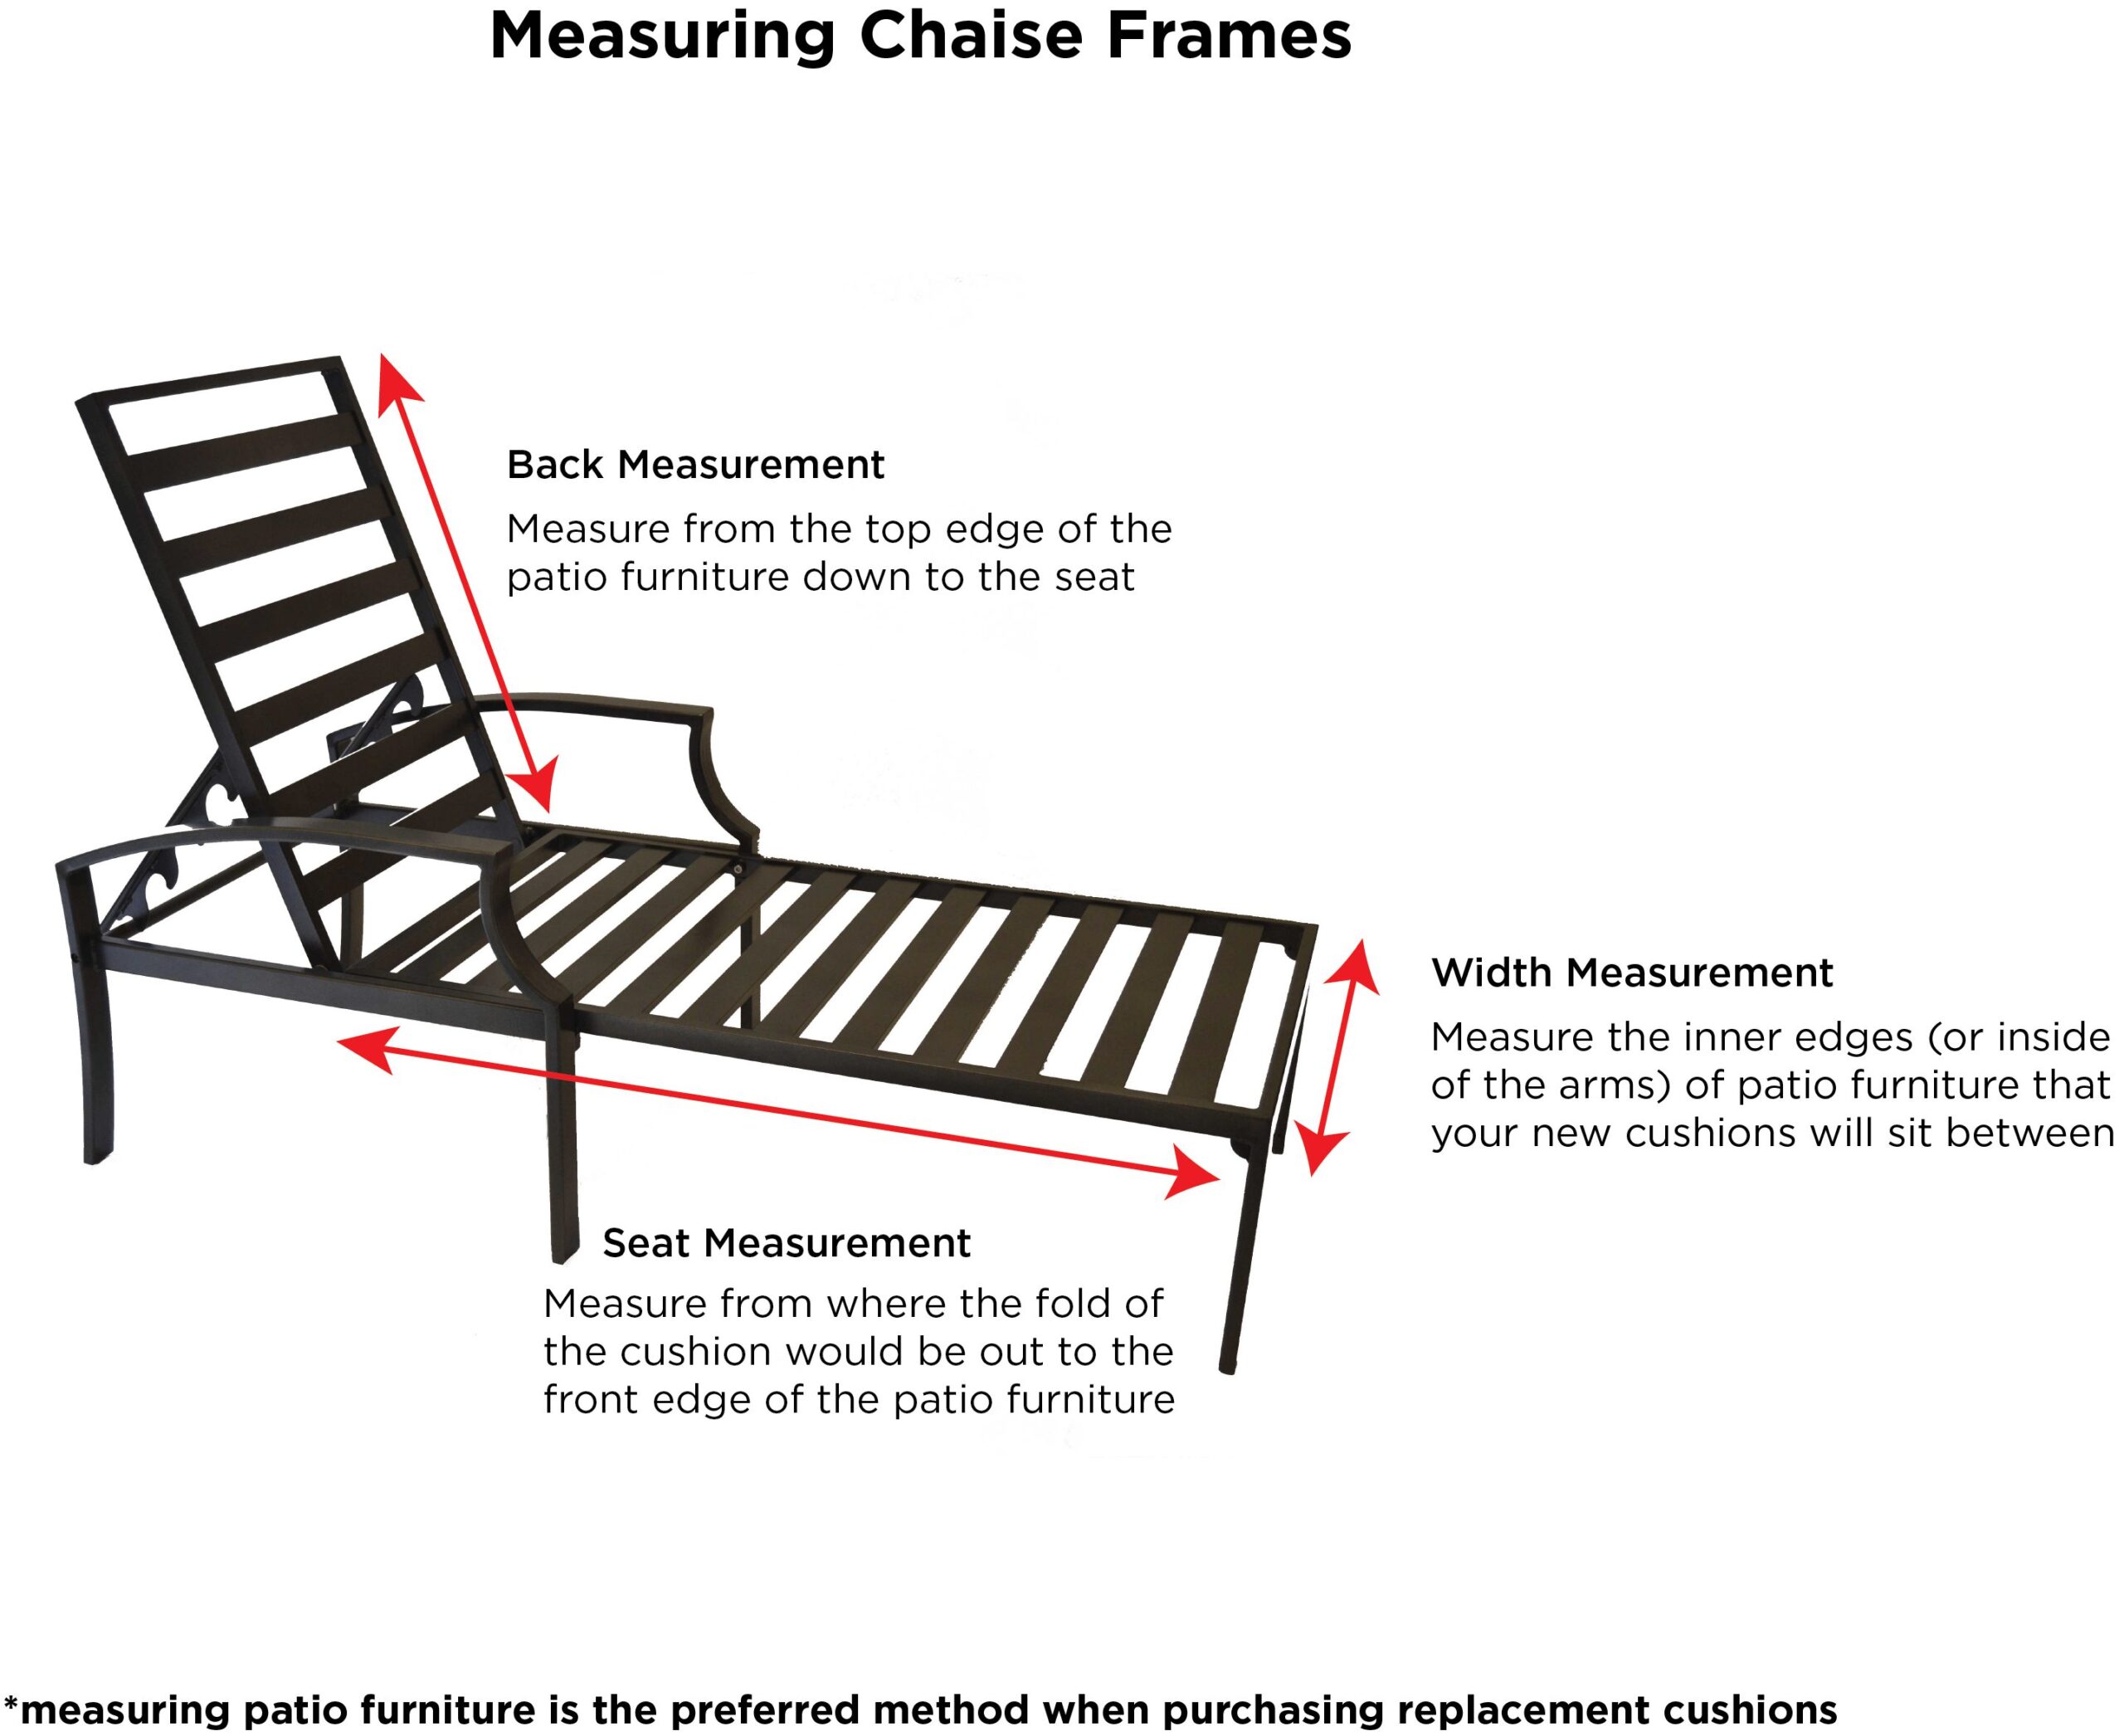 How to Measure a Chair for a Joined Cushion